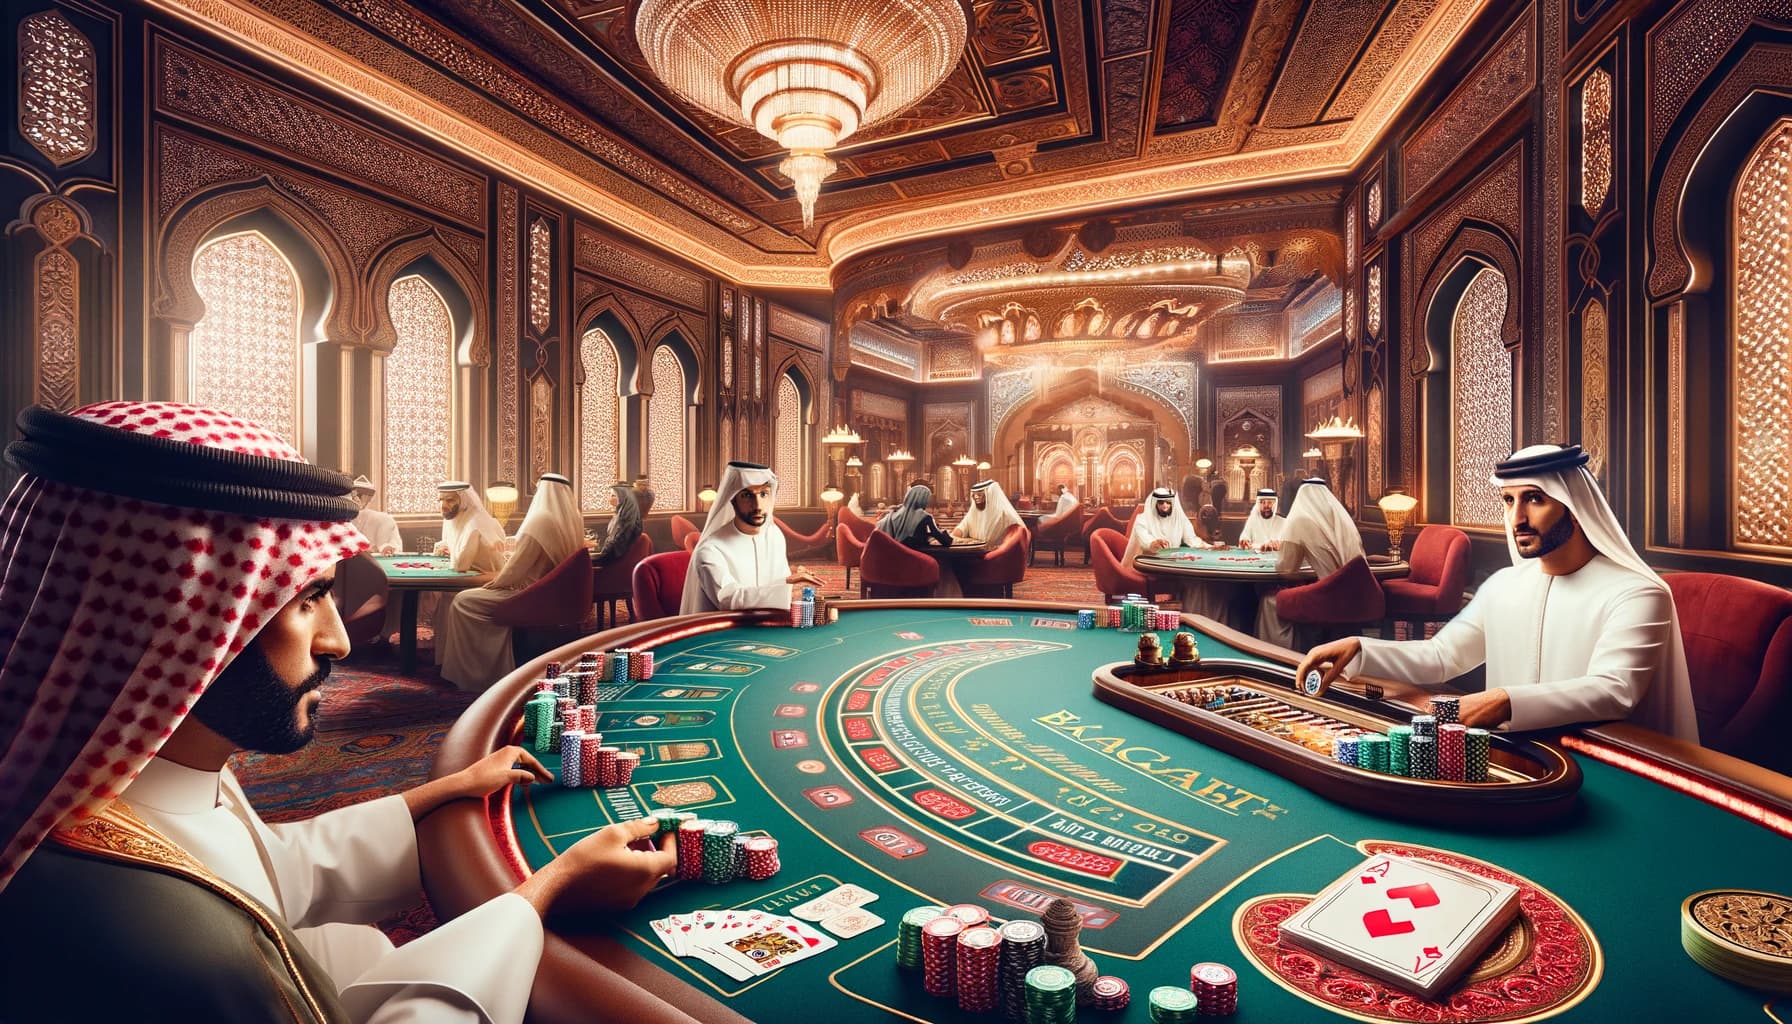 A card game of Baccarat in an Arabic casino setting. The scene includes a Baccarat table with cards and chips, players dressed in traditional Arabic a